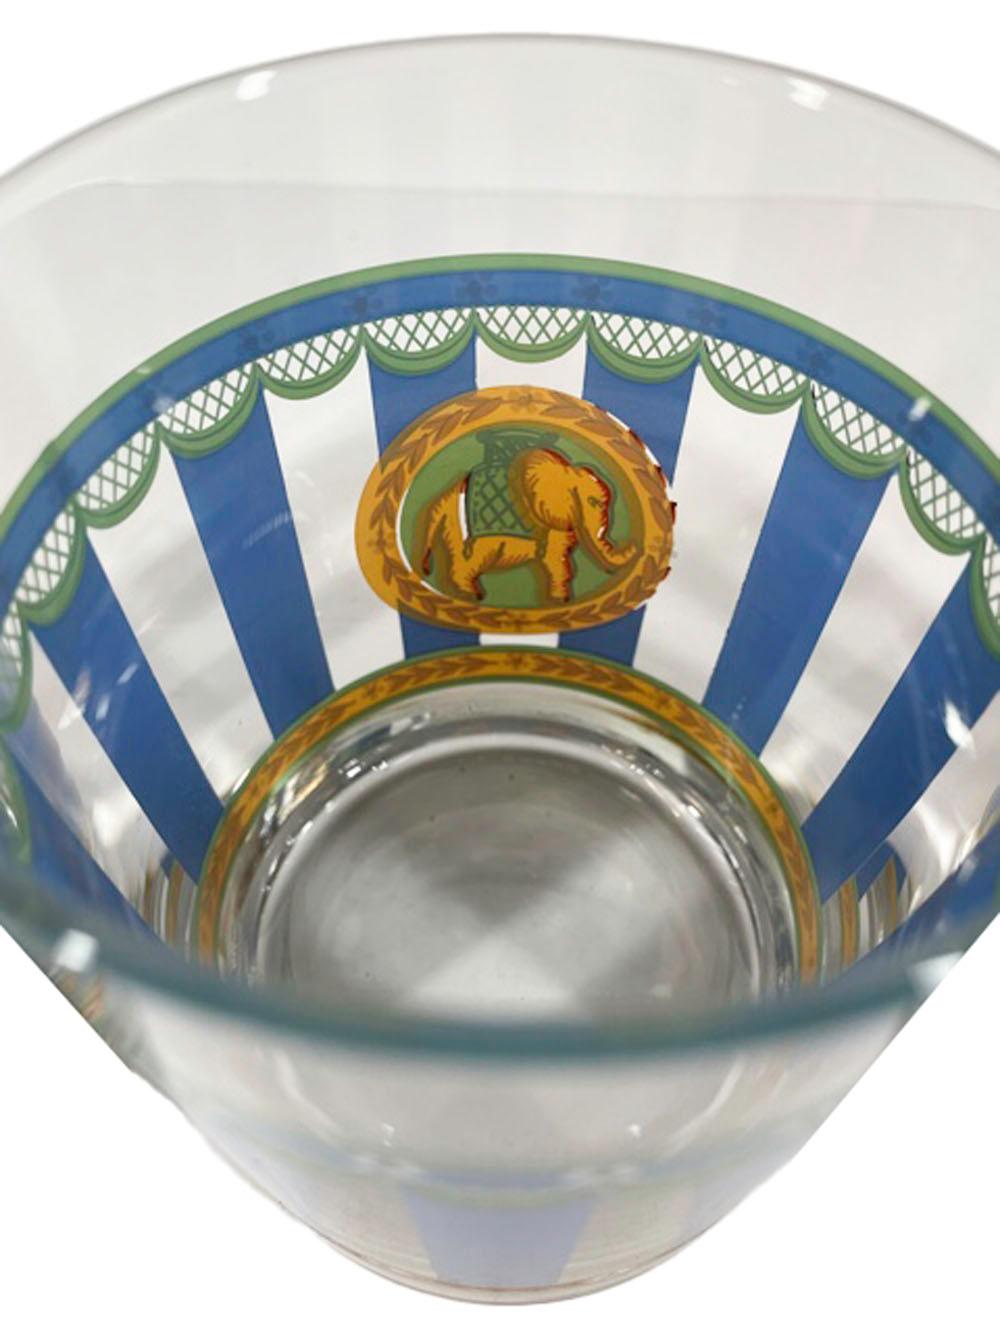 American Vintage Rocks Glasses in Blue & Green Enamel with Elephant Medallions For Sale